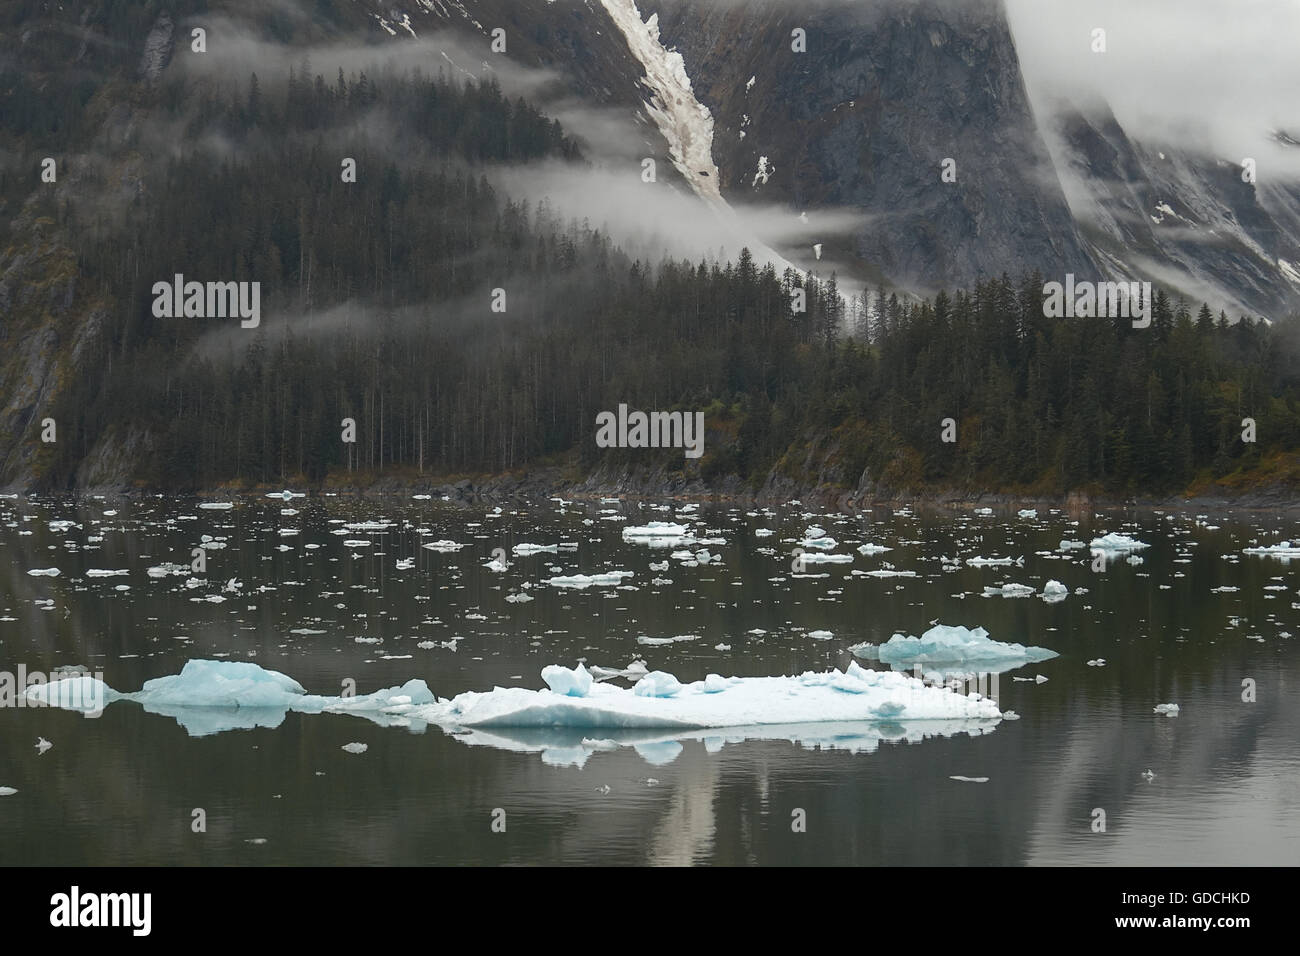 Landscape at Tracy Arm Fjords in Alaska, United States Stock Photo